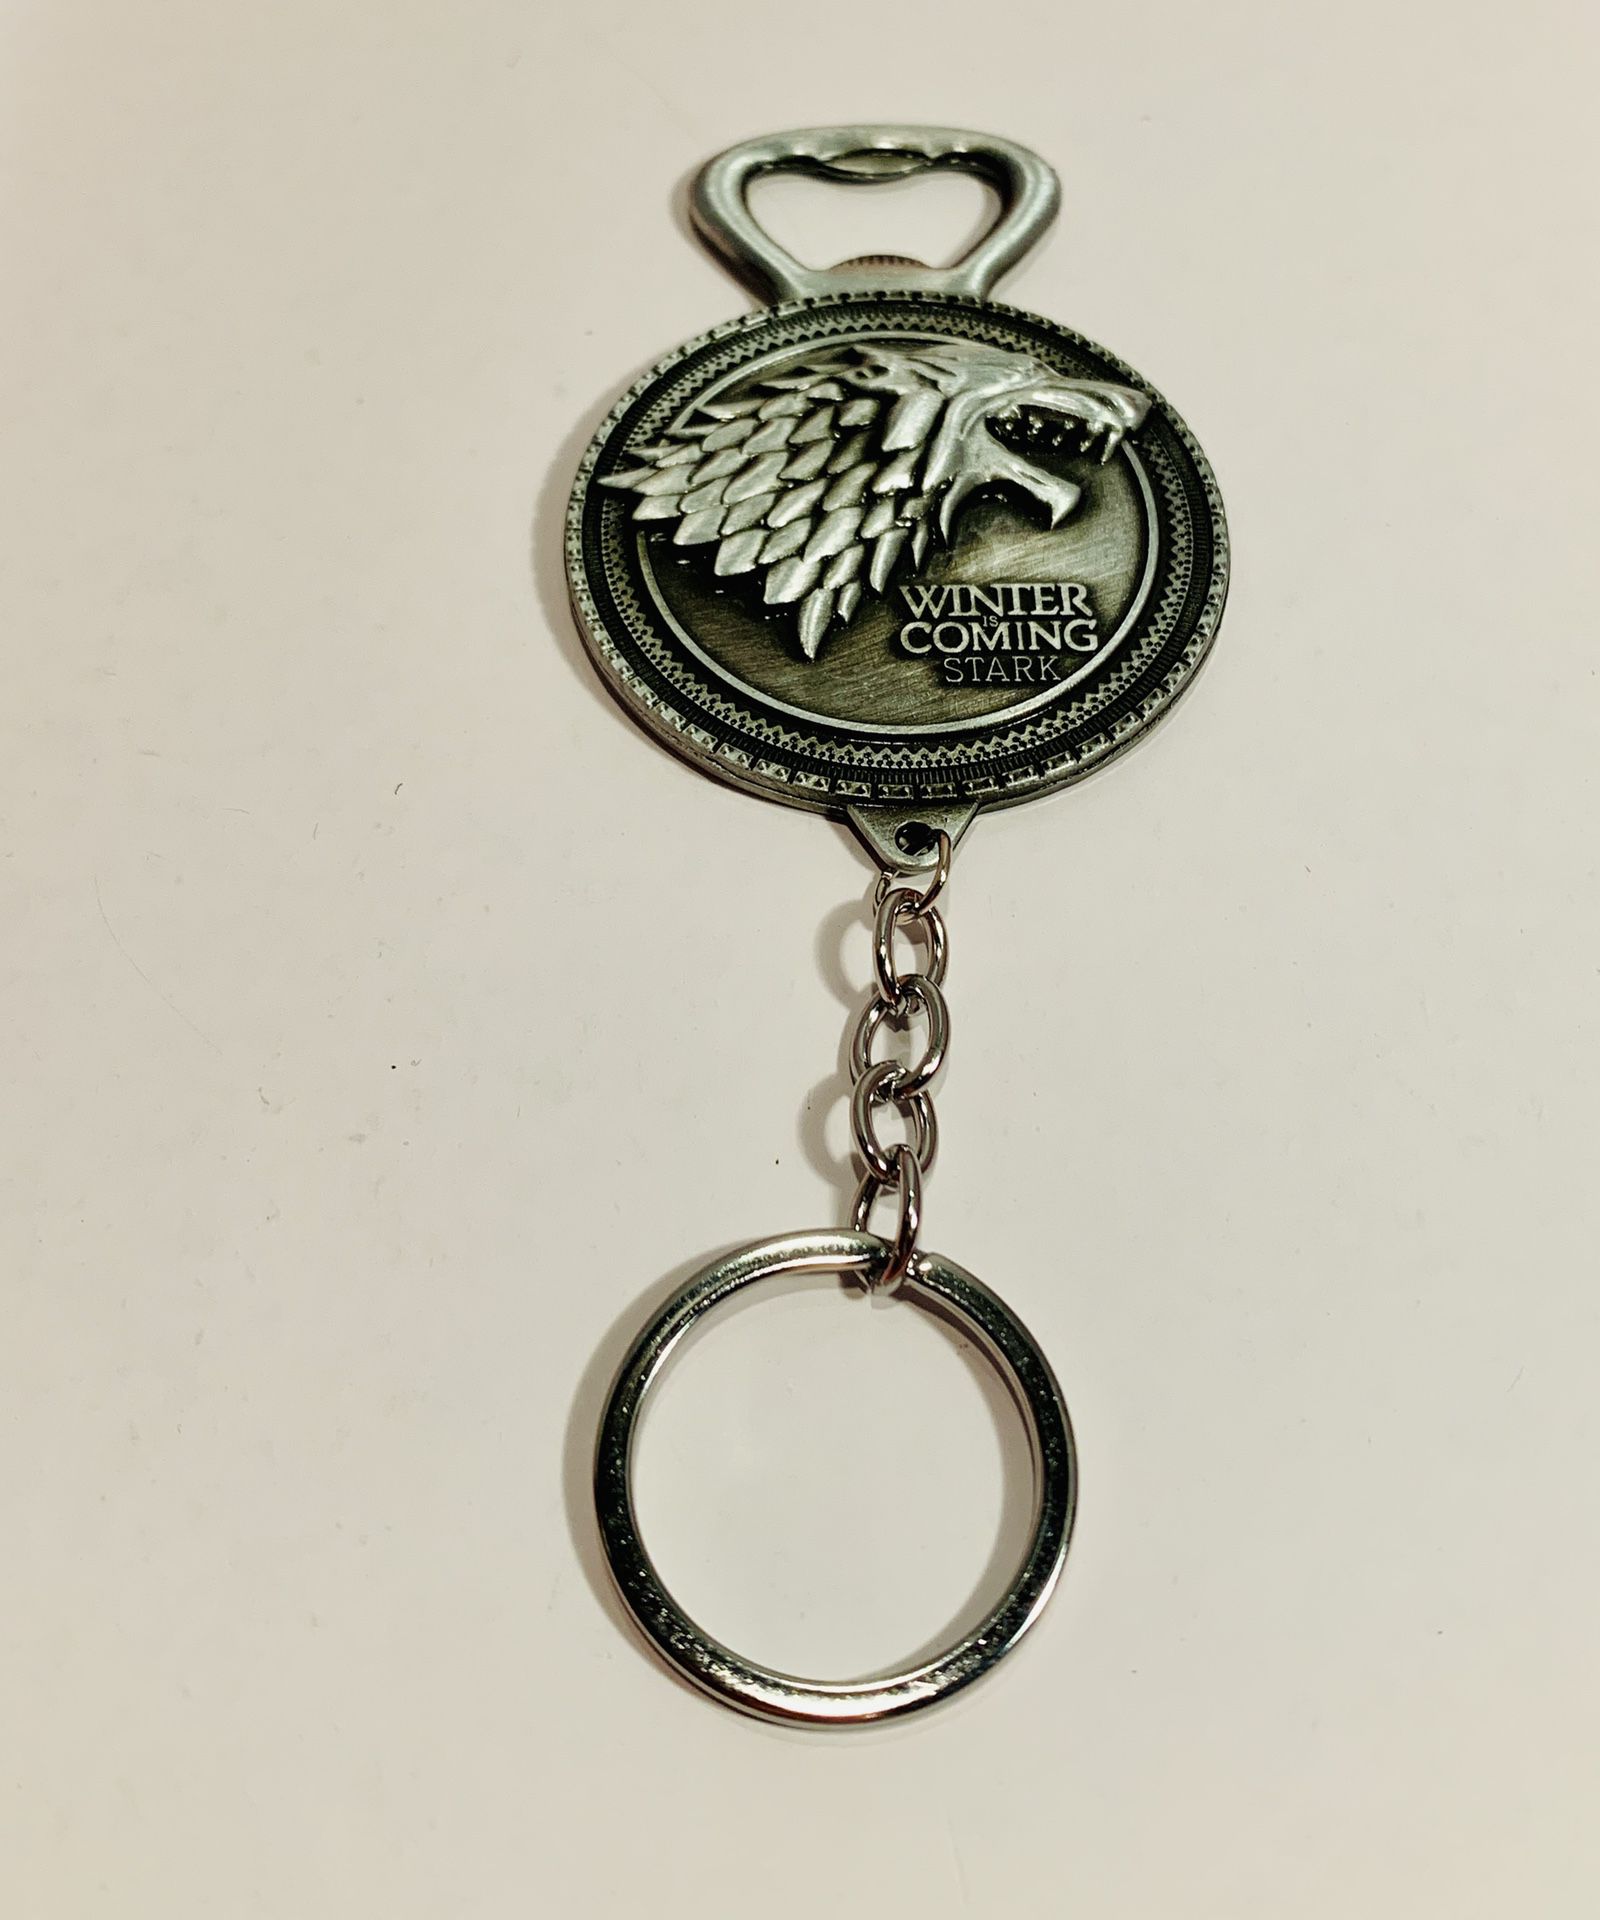 Game of Thrones-Inspired House Stark Keychain/Bottle Opener - Silver Color.   Measures 5.5” long   Smoke free house